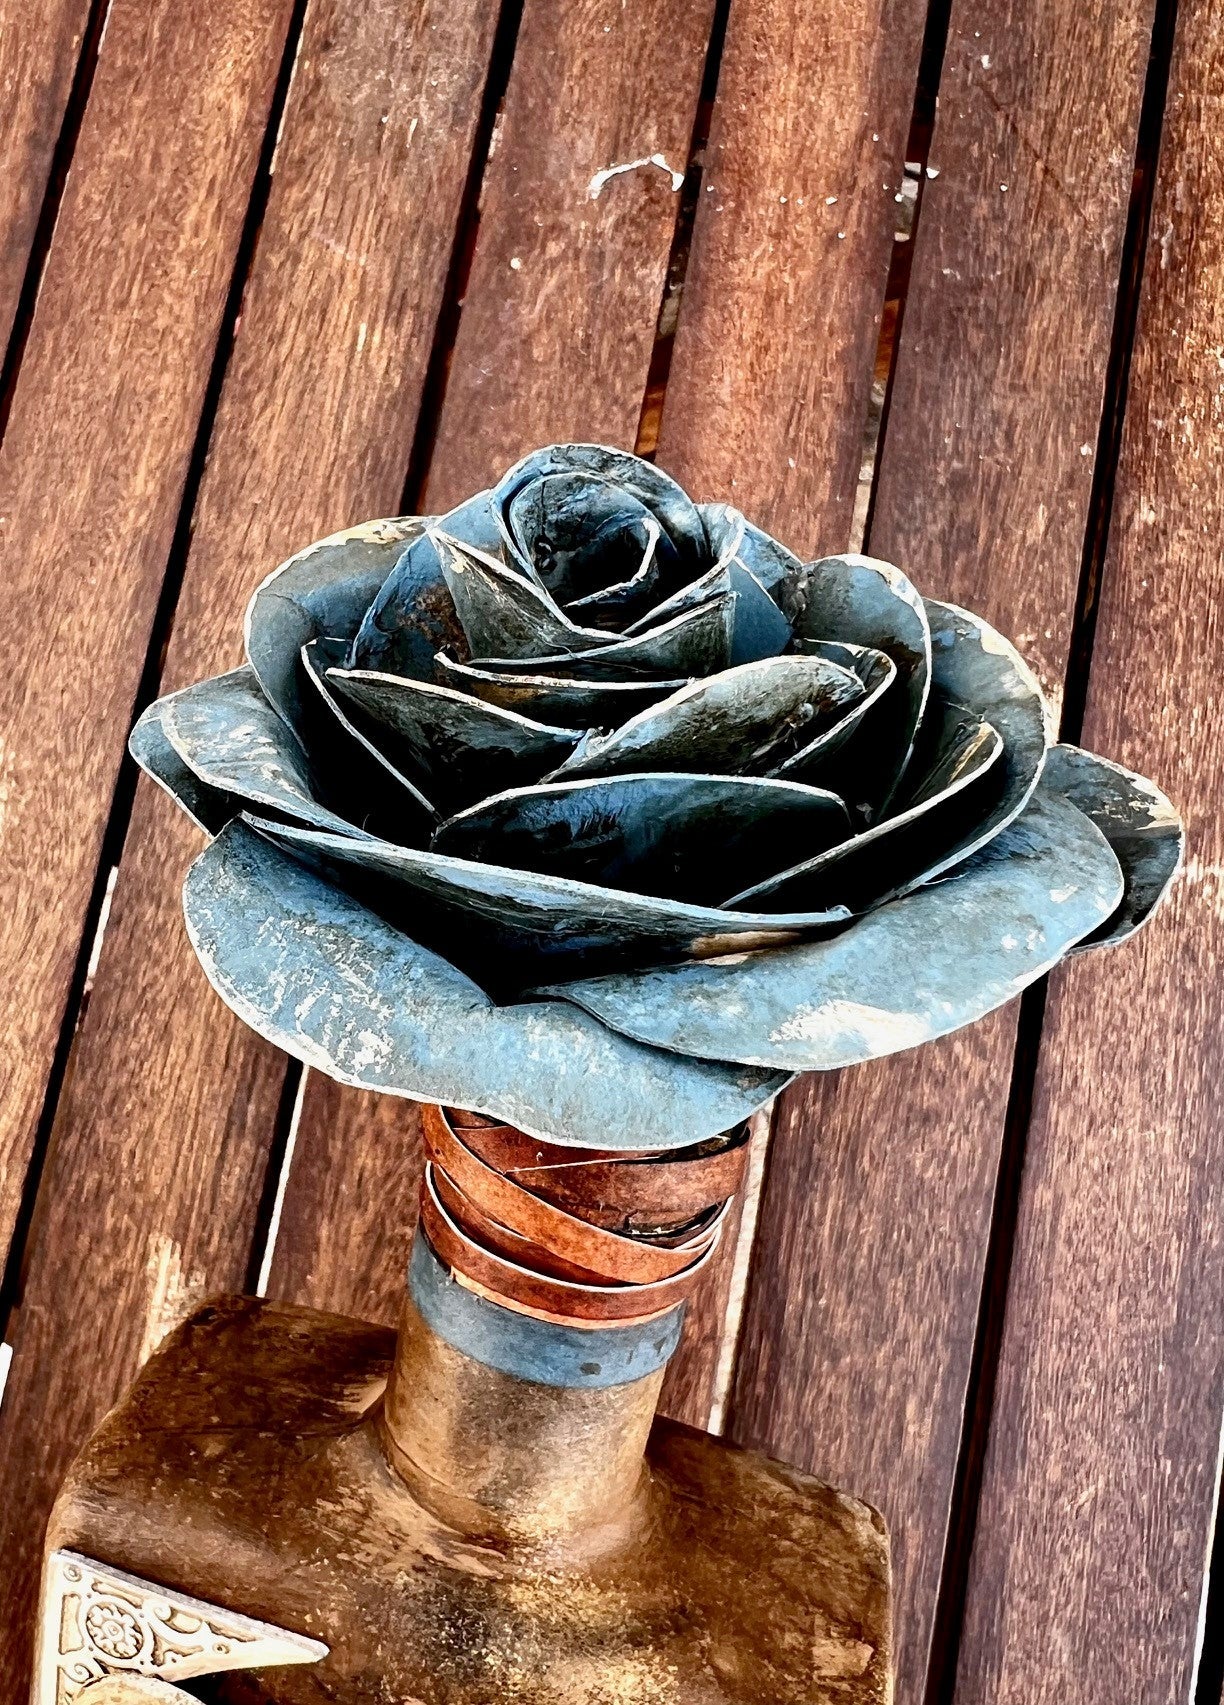 Antonis Workshop - Blue Rose Bottle Project - Friday 9th August   9am to 2pm